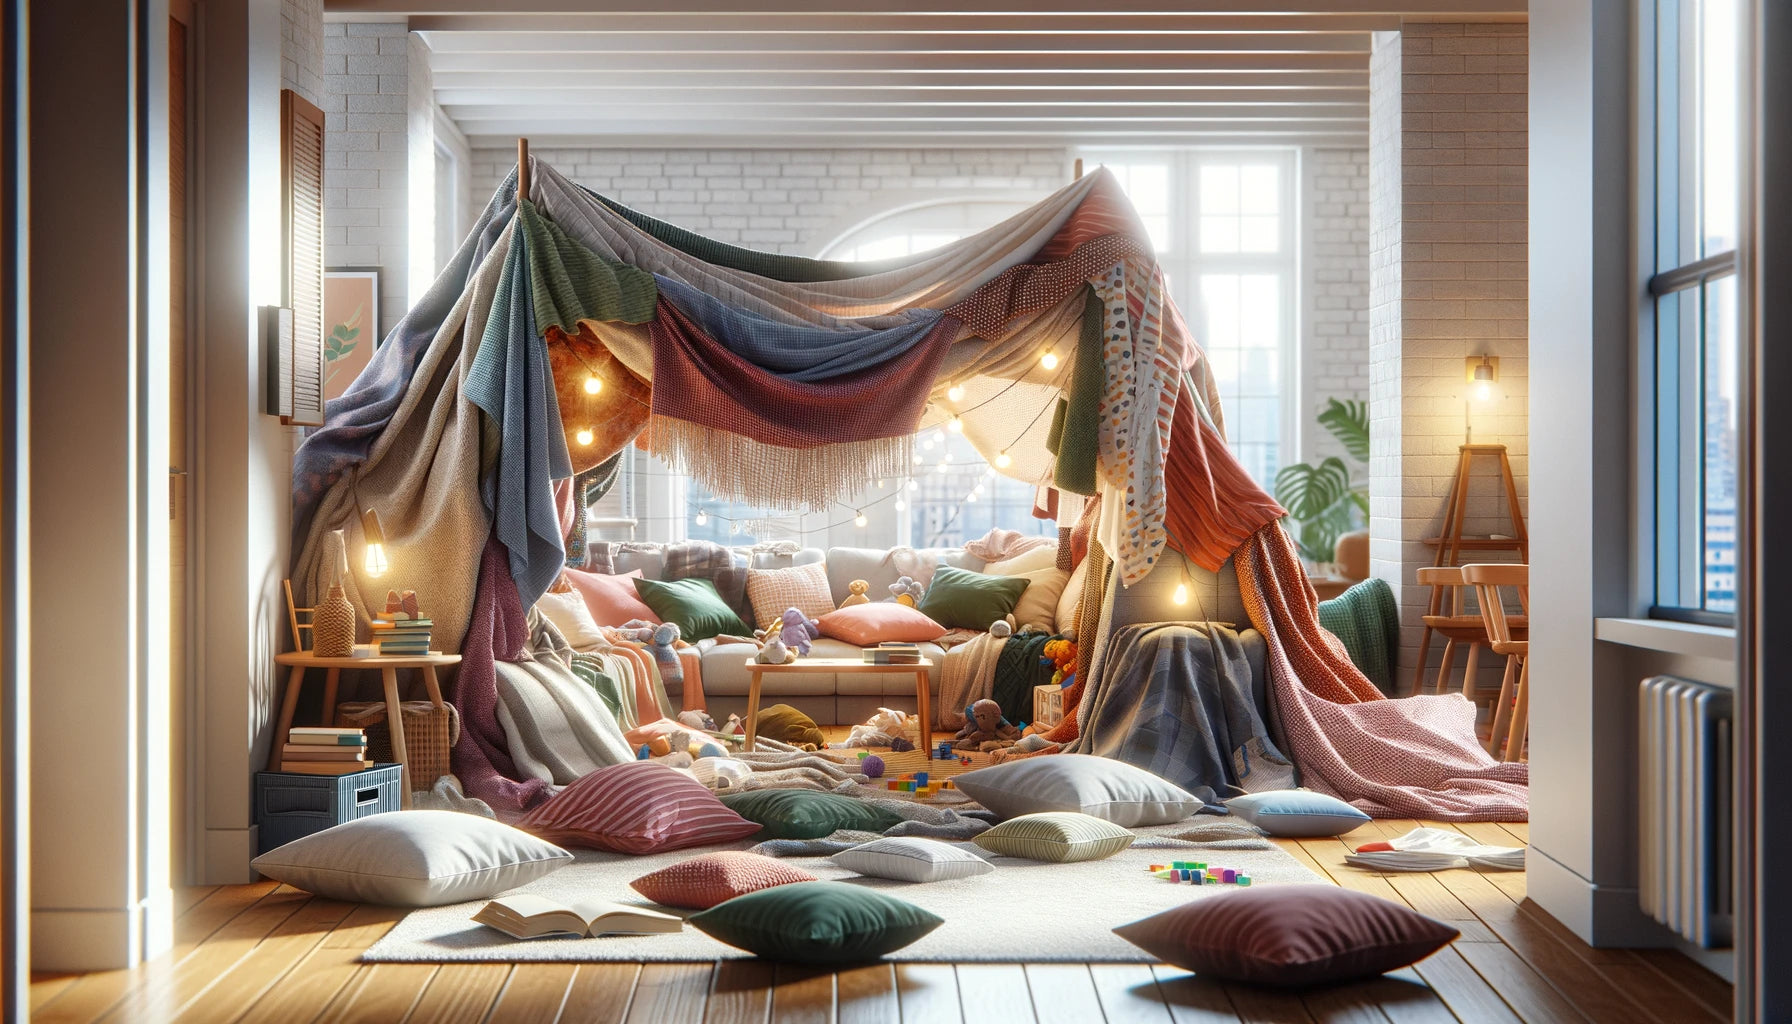 How to Make a Blanket Fort: Creative DIY Ideas